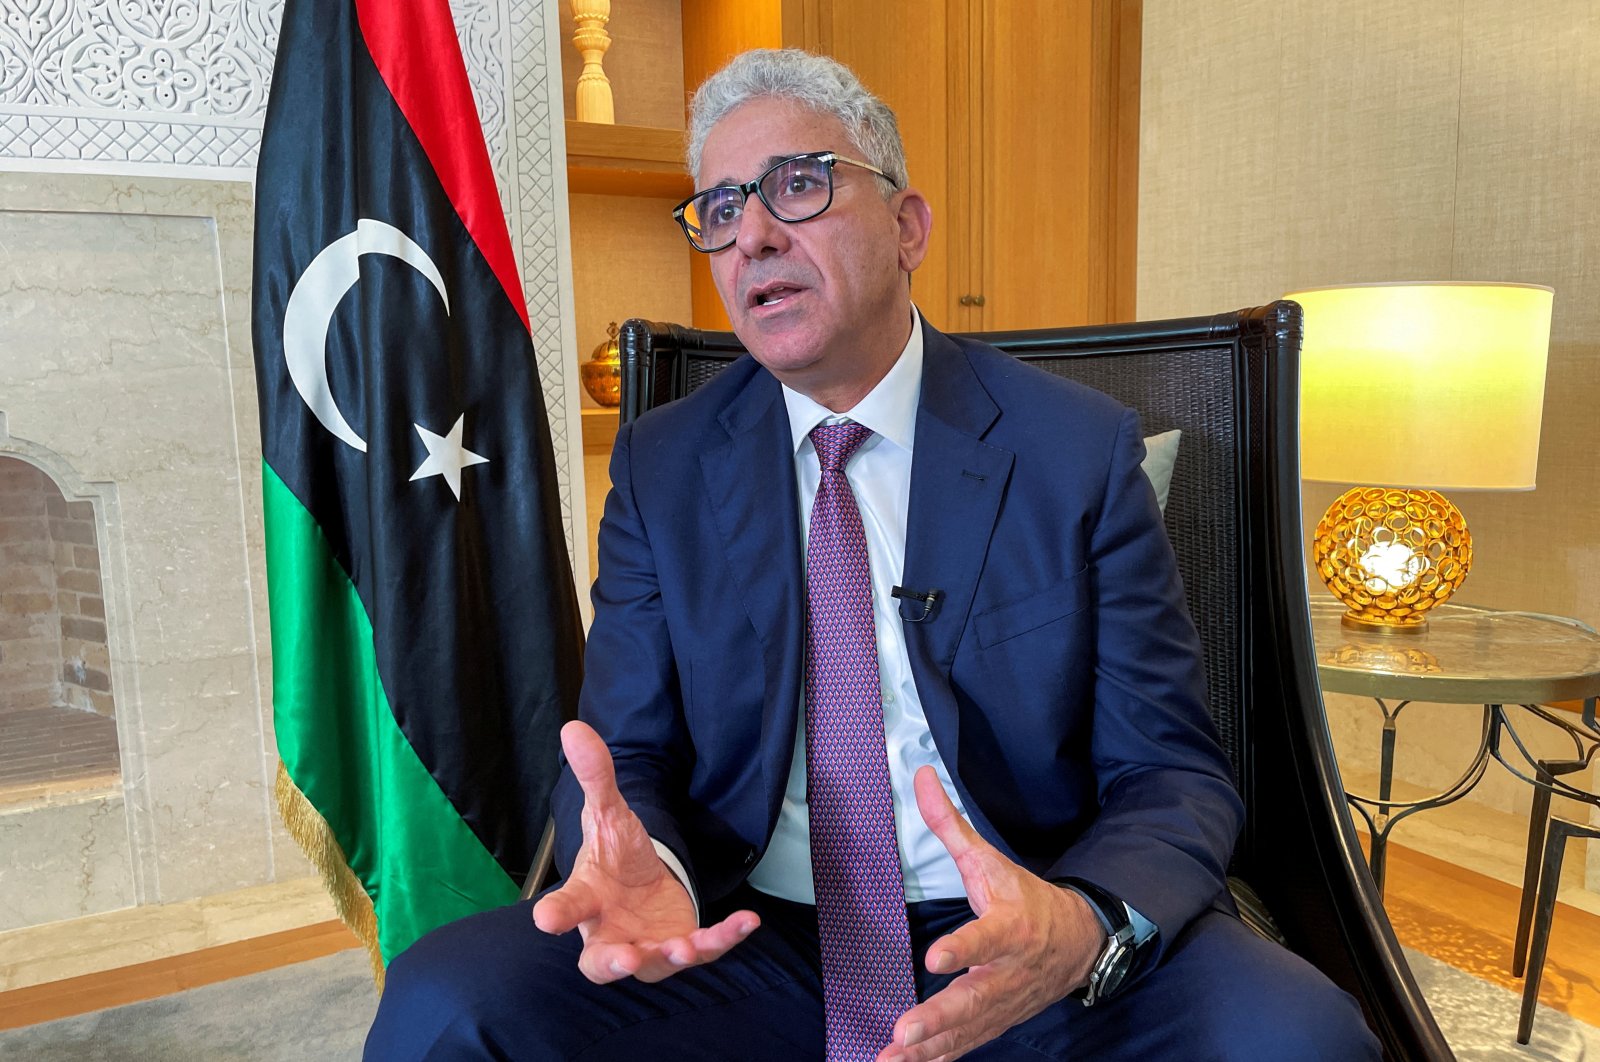  Libya&#039;s Fathi Bashagha, who was appointed prime minister by the eastern-based parliament, speaks during an interview with Reuters in Tunis, Tunisia March 30, 2022. (Reuters File Photo)